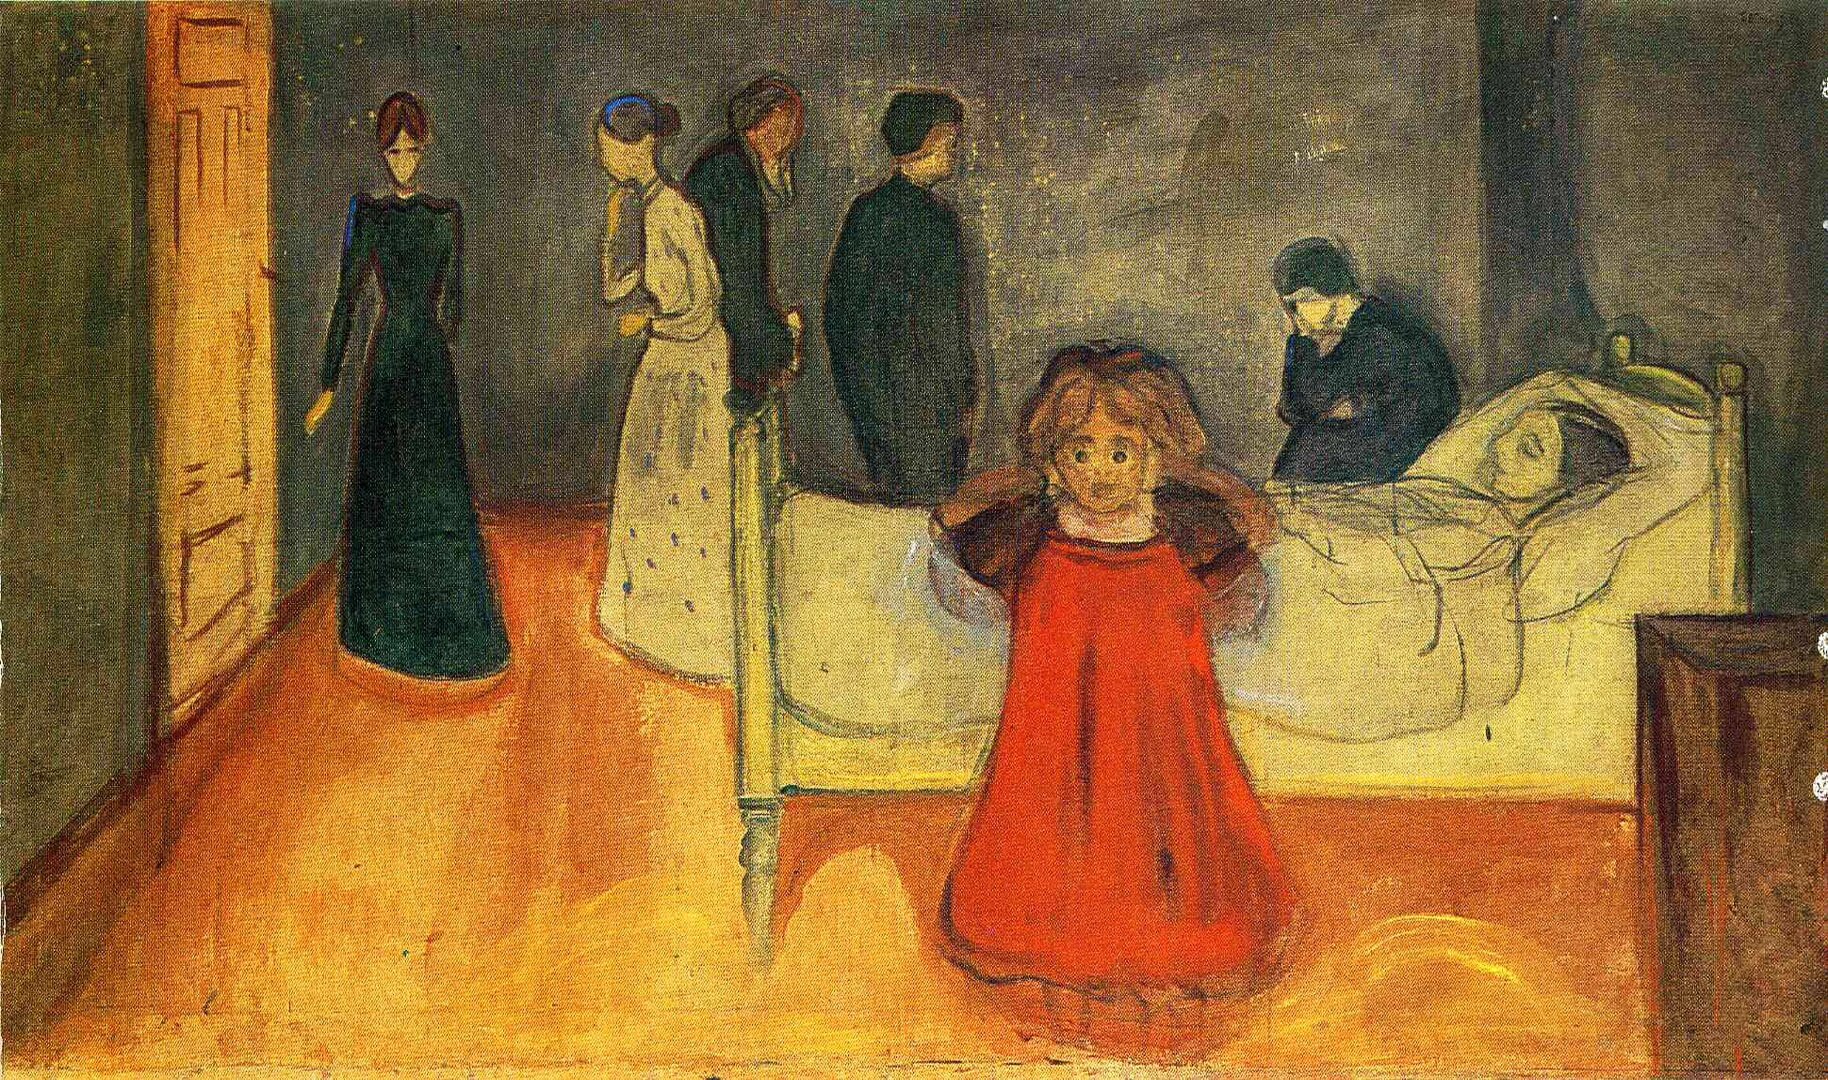 Edvard Munch, The Dead Mother and her Child, between 1897 and 1899